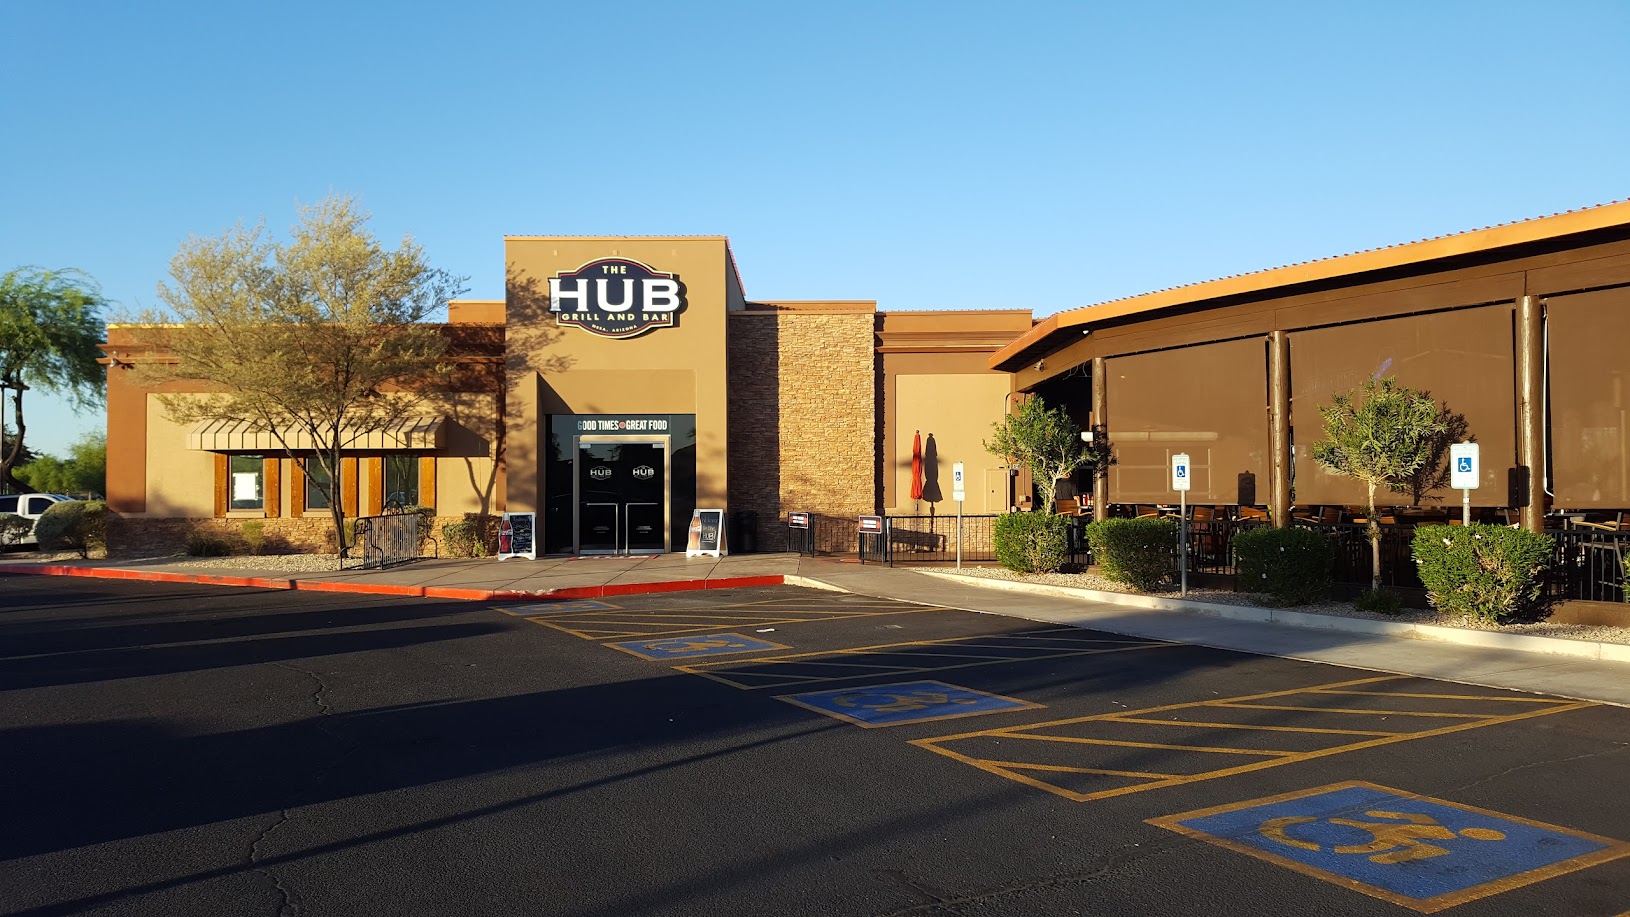 The Hub Grill and Bar